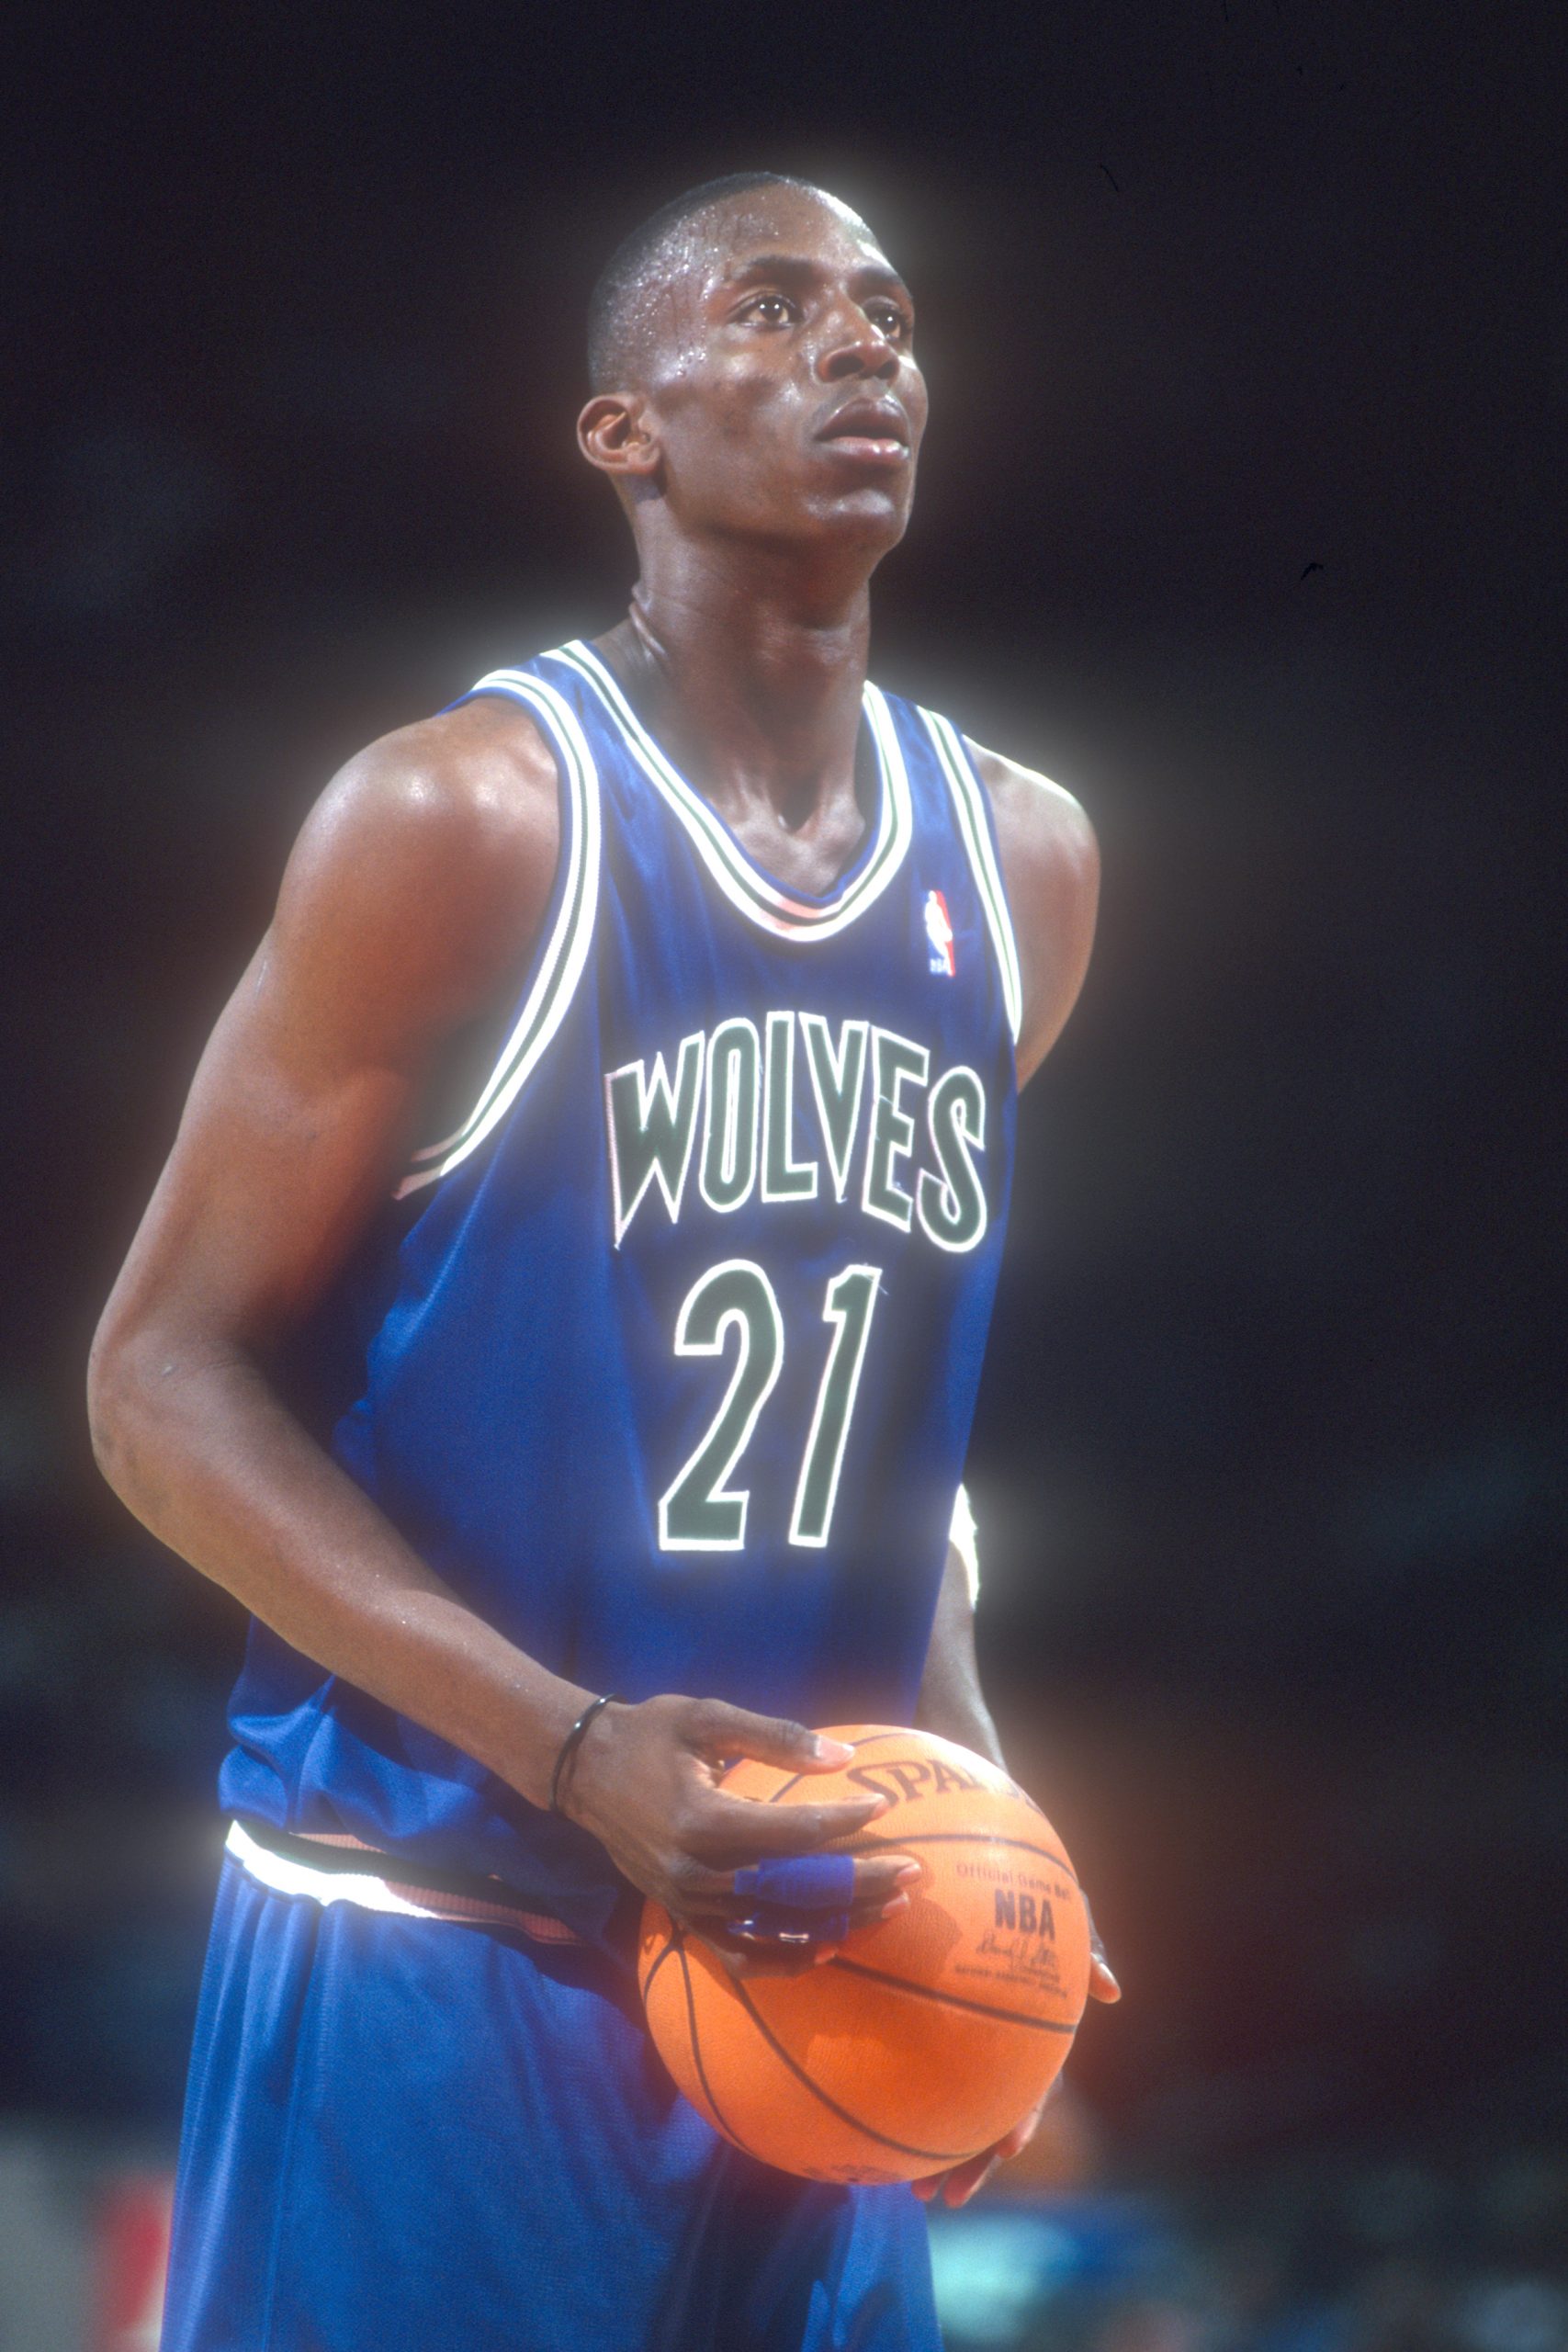 Kevin Garnett on why he chose to wear jersey number 21